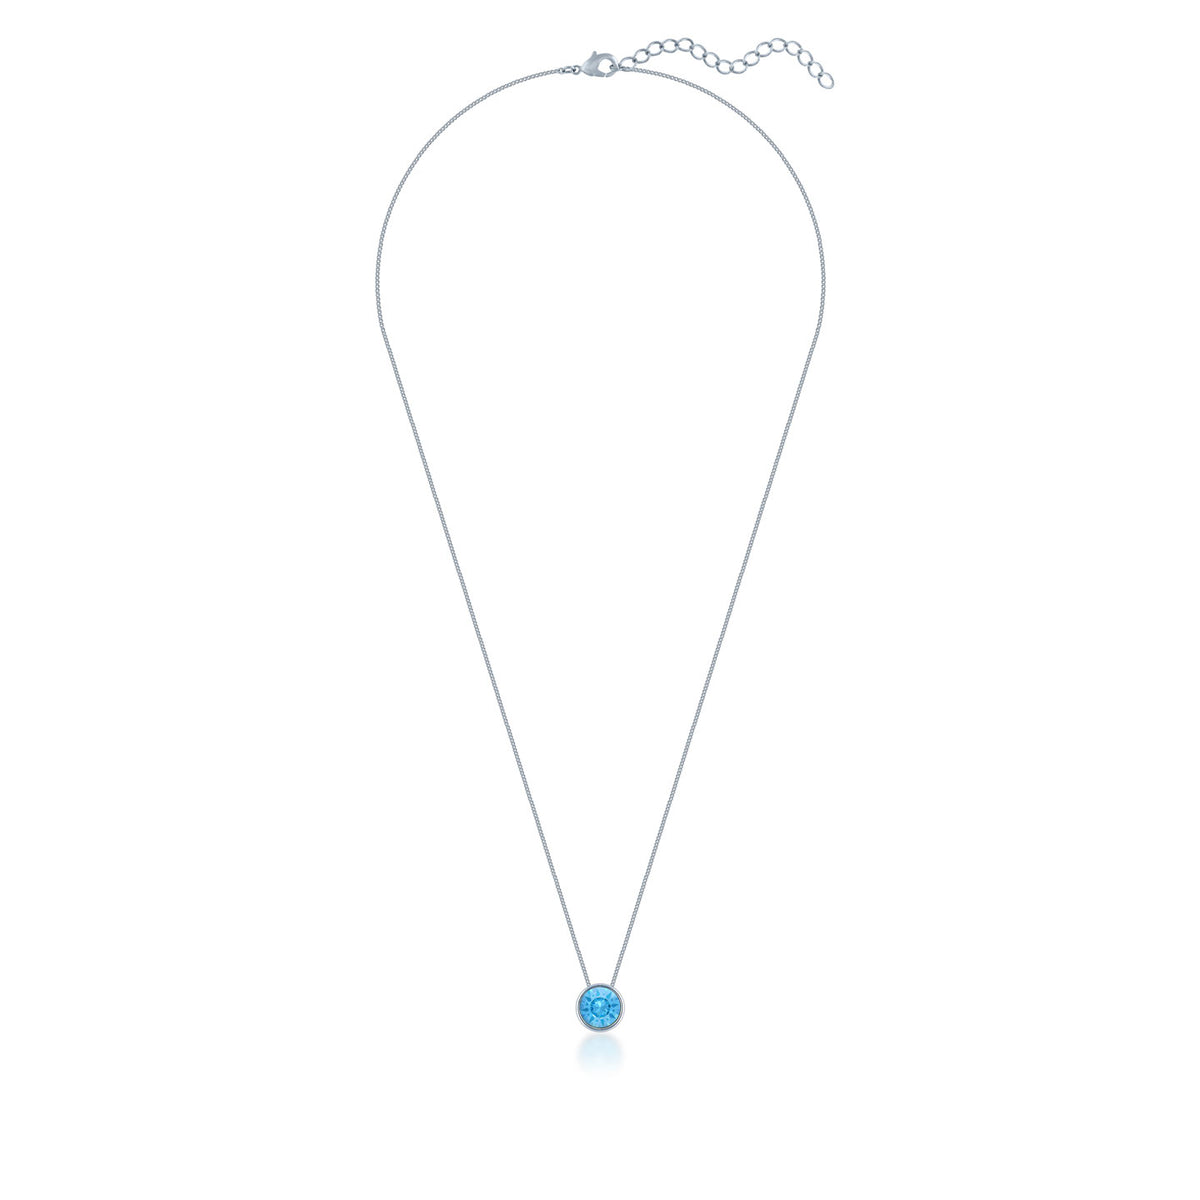 Harley Small Pendant Necklace with Blue Aquamarine Round Crystals from Swarovski Silver Toned Rhodium Plated - Ed Heart